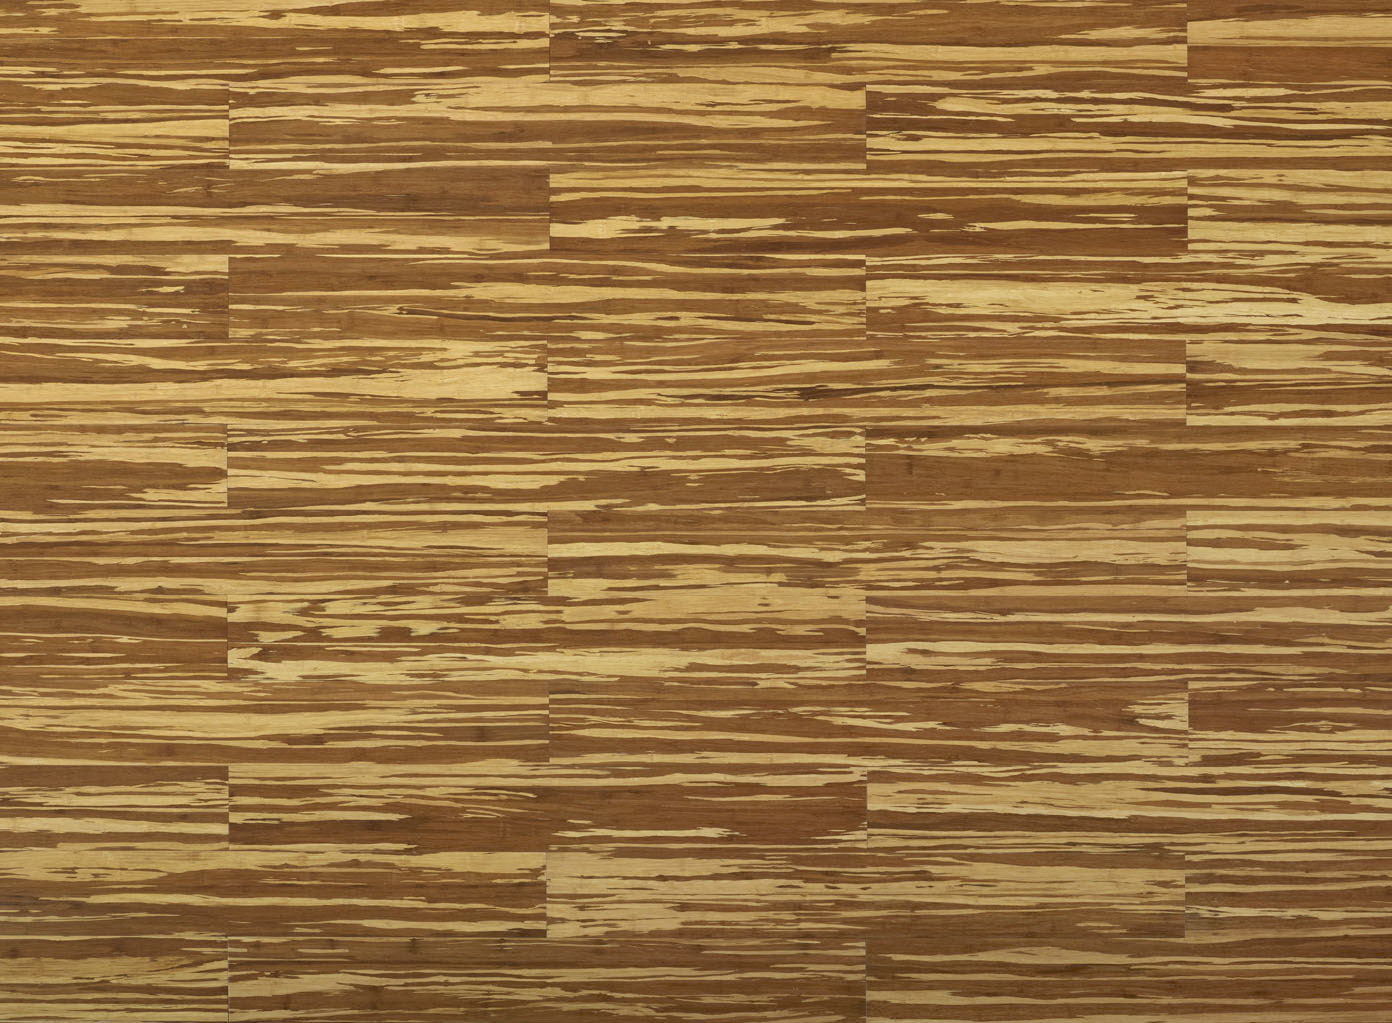 Tiger Stripes Indoor Strand Woven Structure Bamboo Flooring